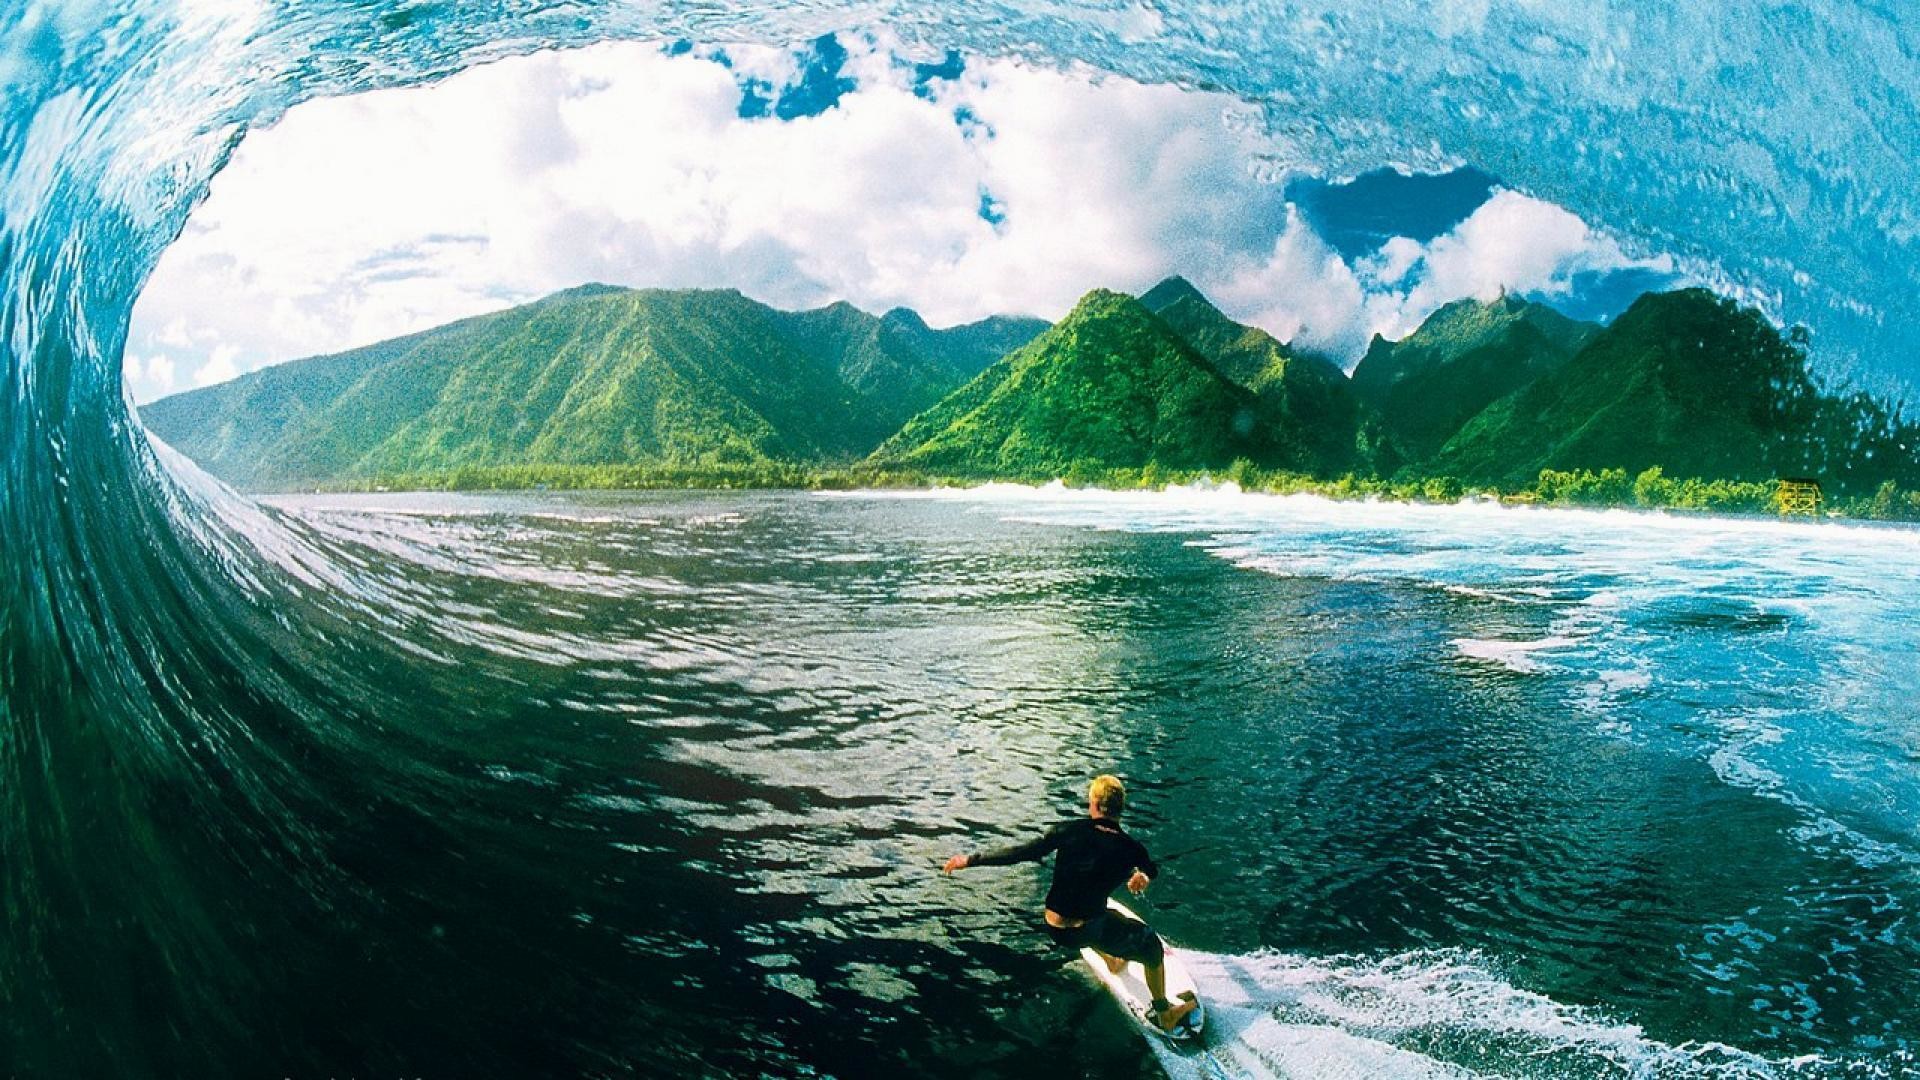 Surfing Wallpaper and Screensavers (60+ images)